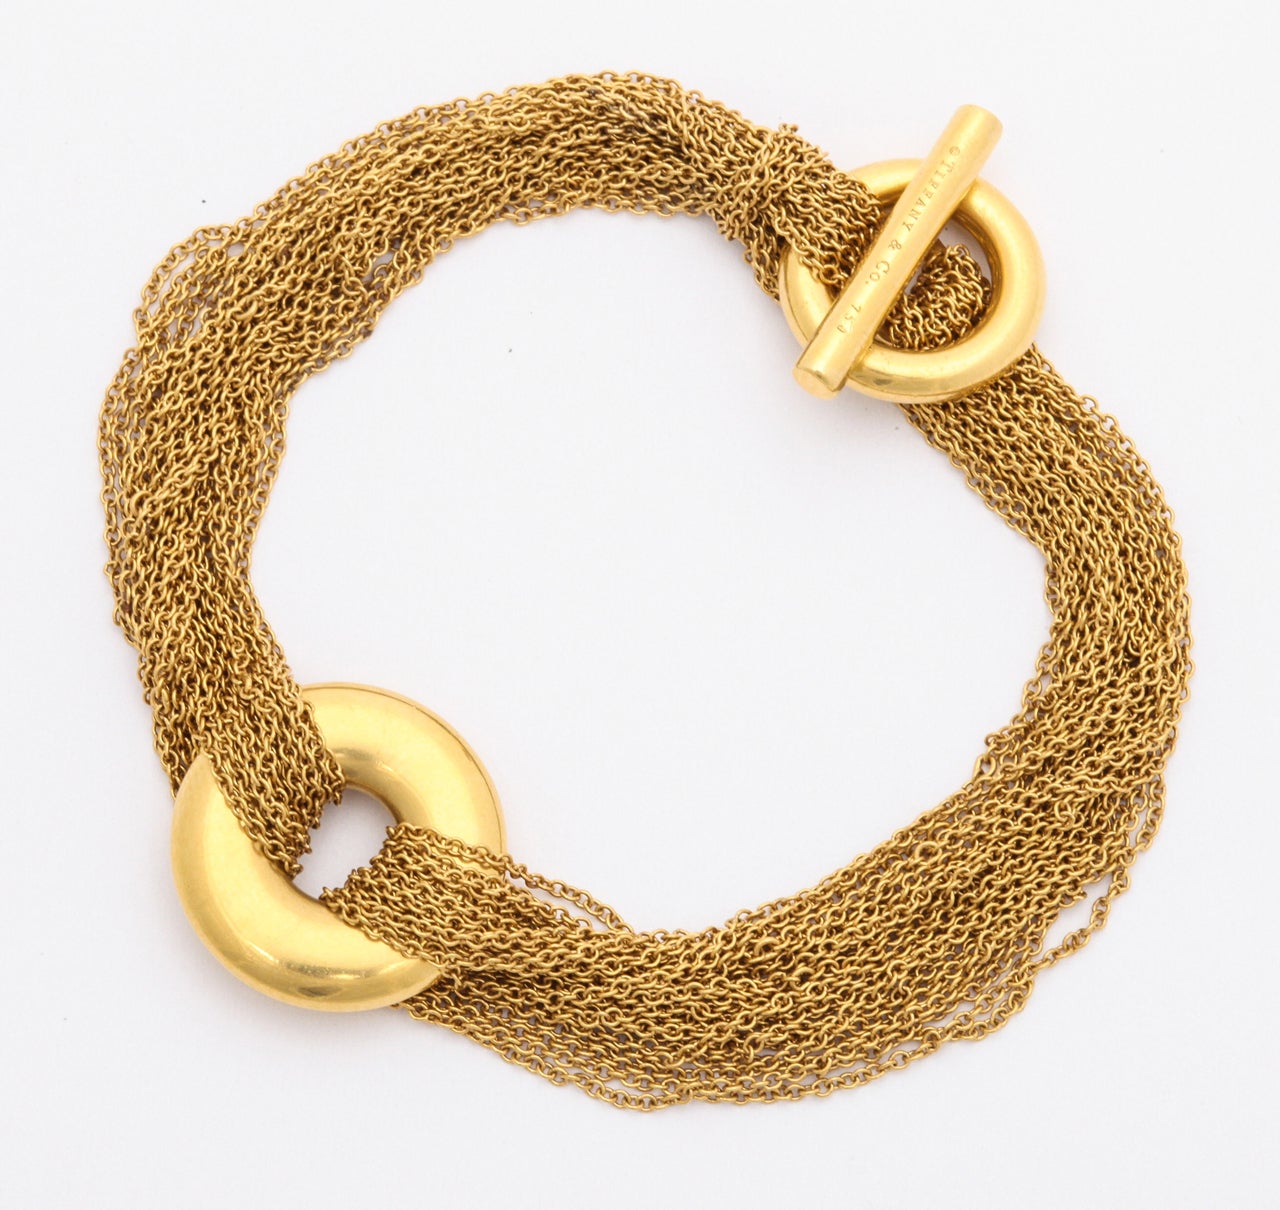 18kt yellow gold bracelet consisting of numerous mesh links designed with a solid gold high polished disc with toggle closure made by TIFFANY &CO.